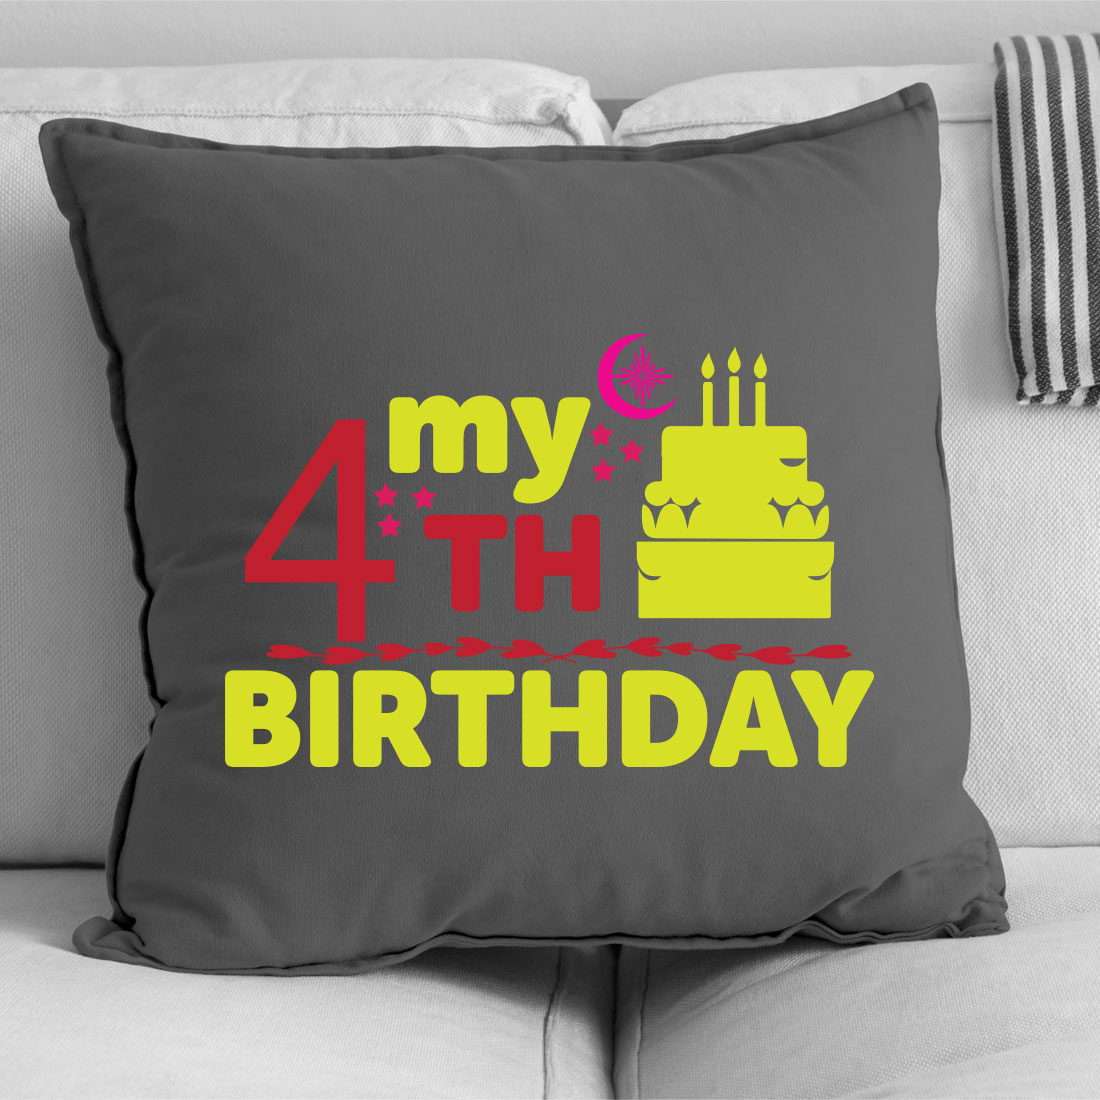 Pillow with a birthday cake on it.